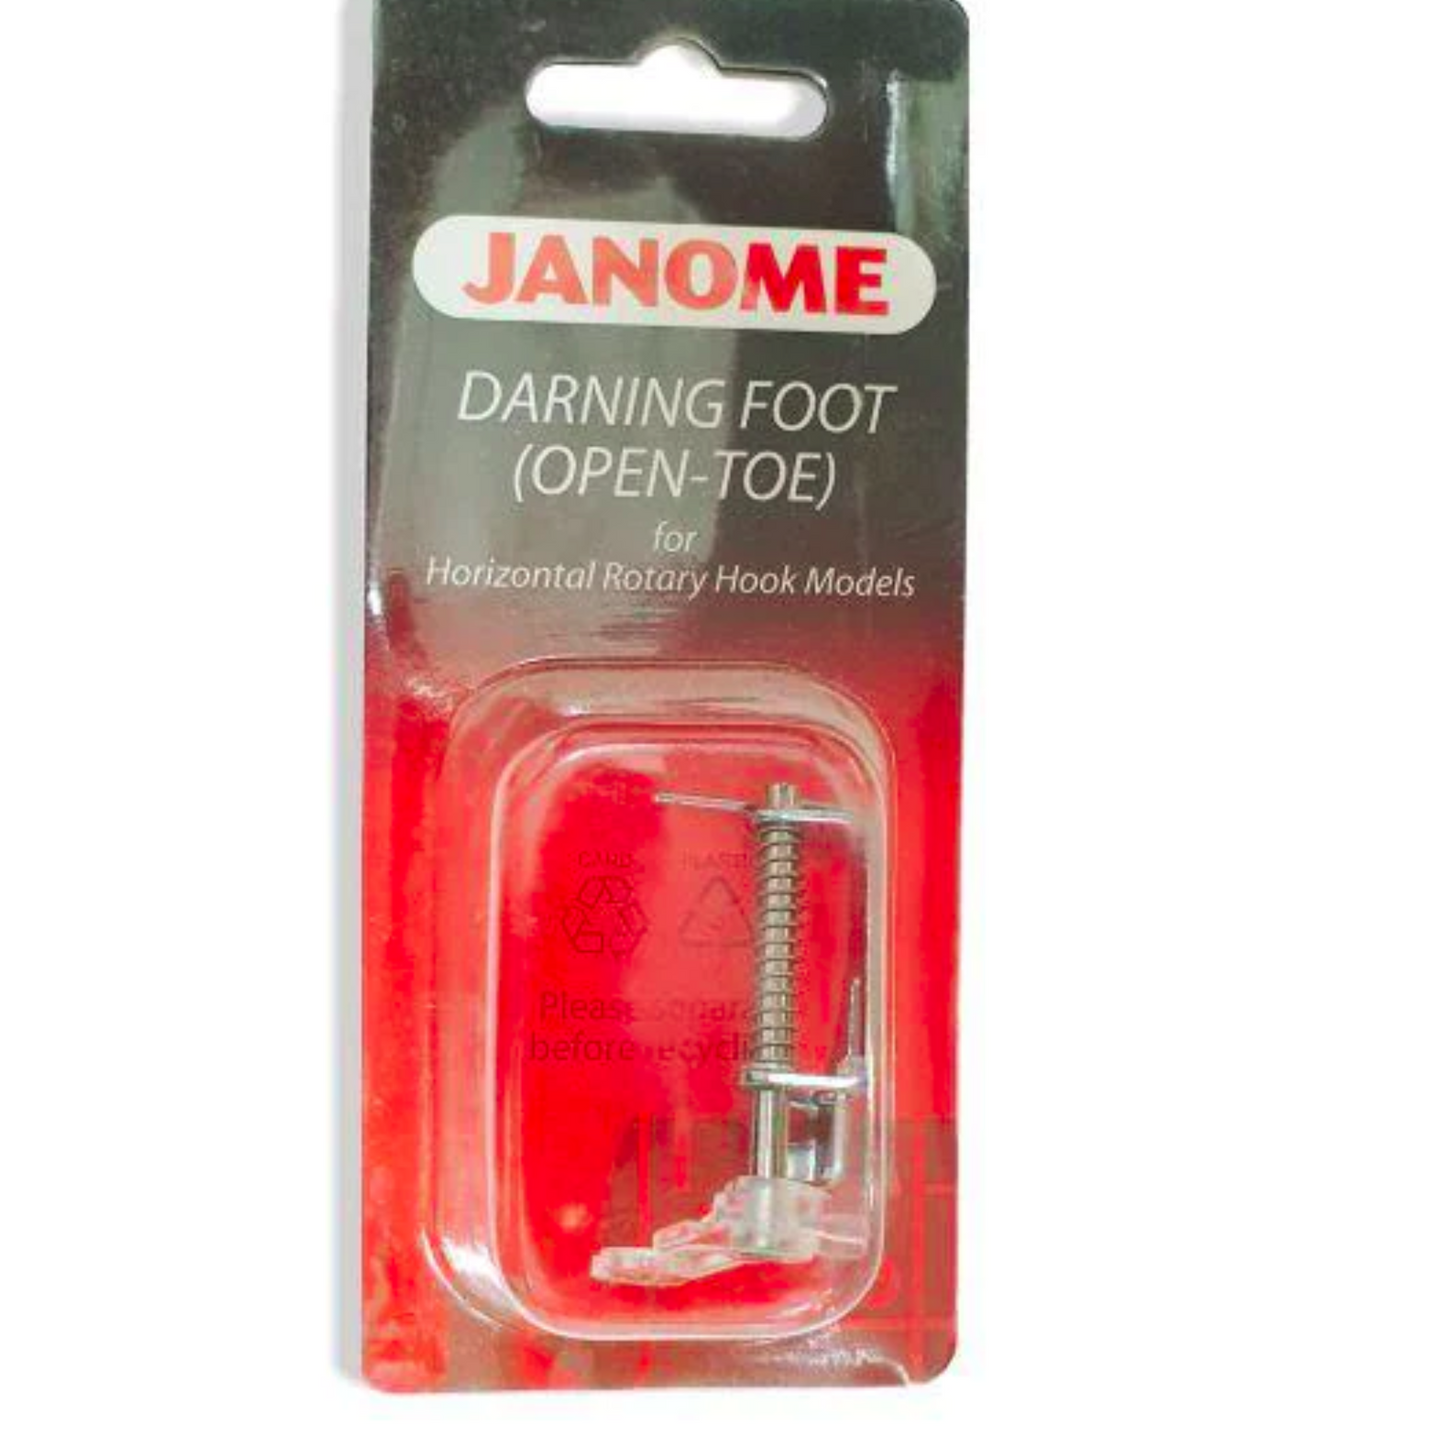 Janome - Darning foot (open-toe) - Sewing accessory - Silver - Packet